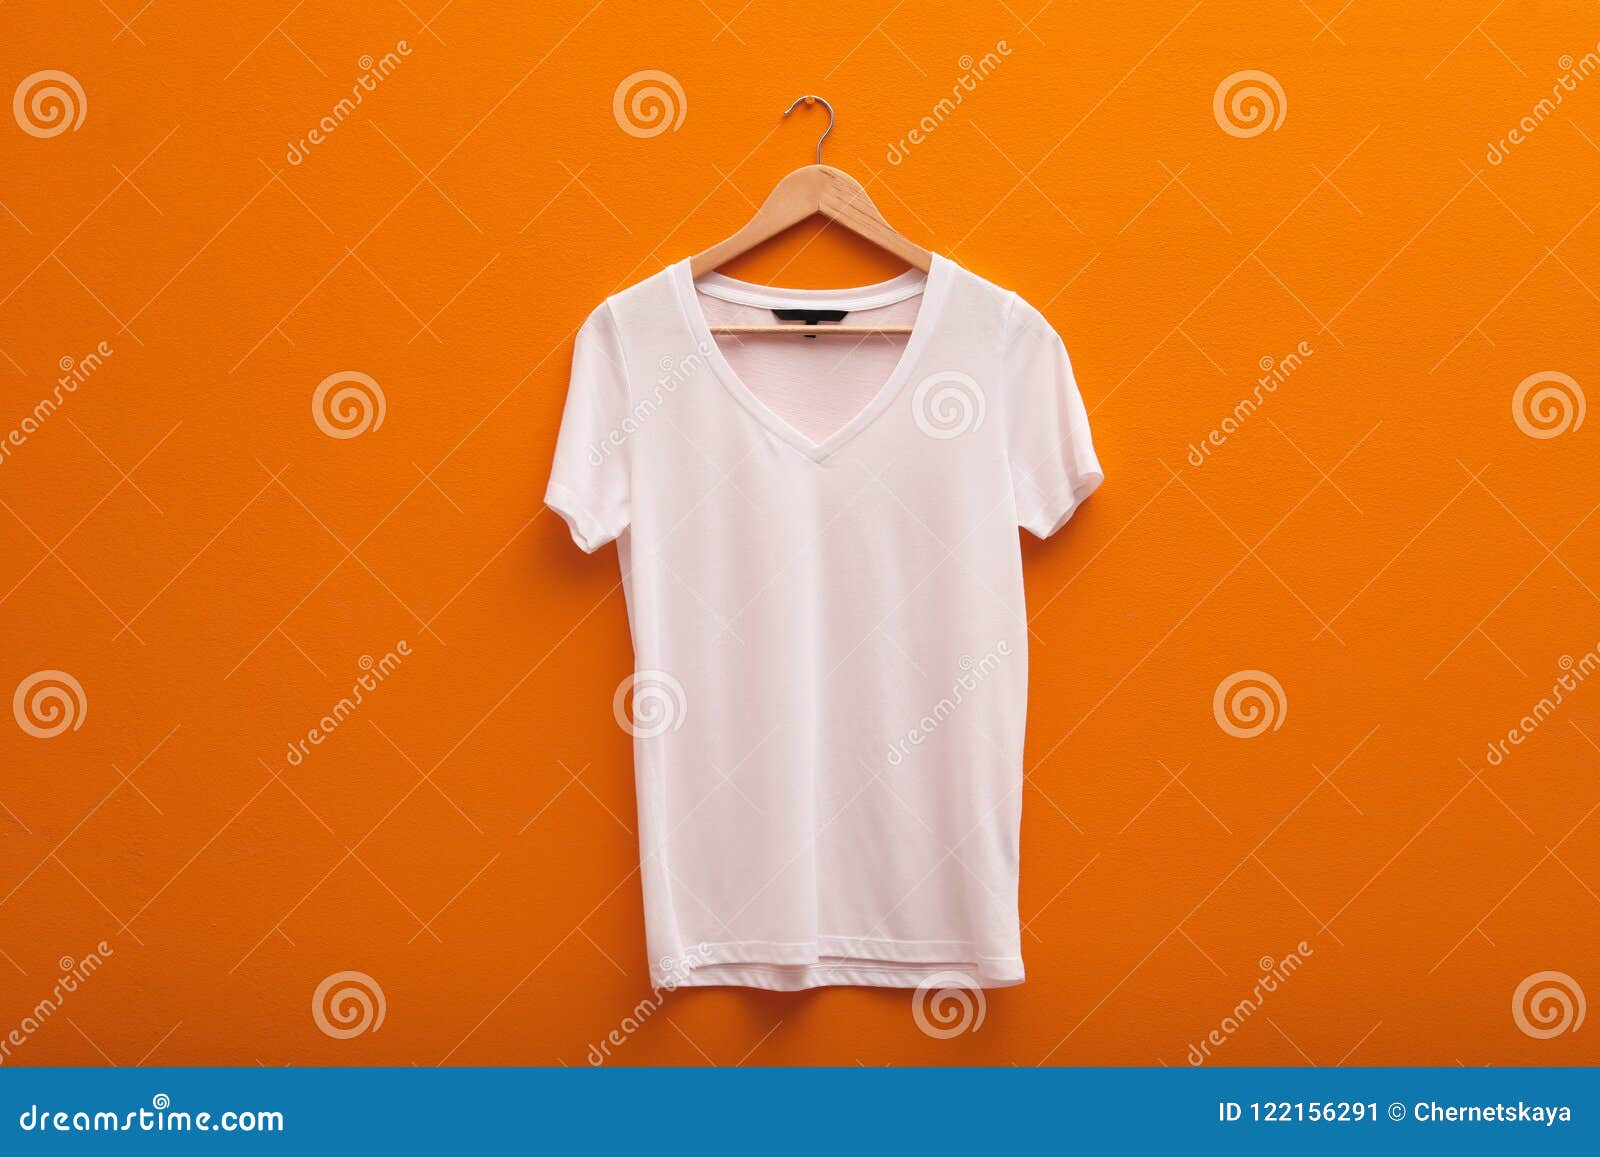 Download Hanger With Blank T Shirt On Color Background Stock Image Image Of Orange Fashion 122156291